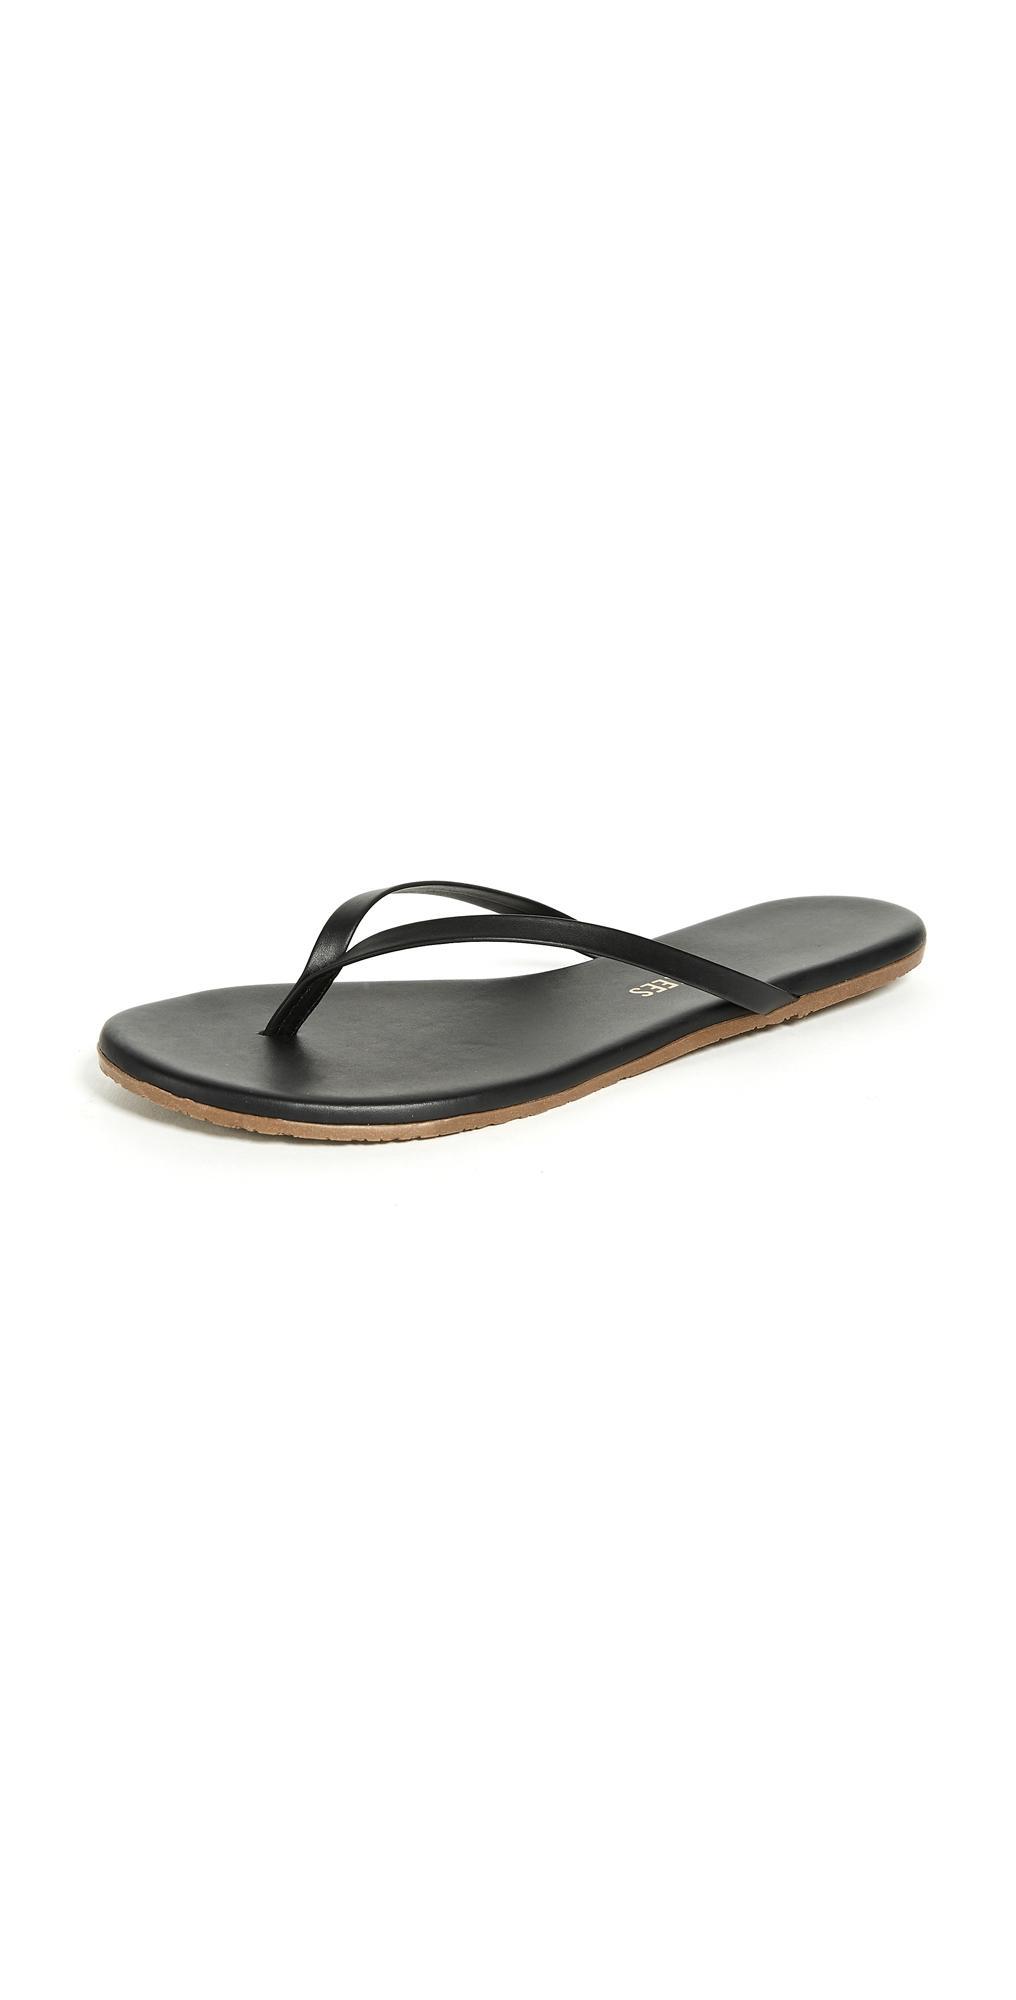 TKEES Liners Flip Flop Product Image